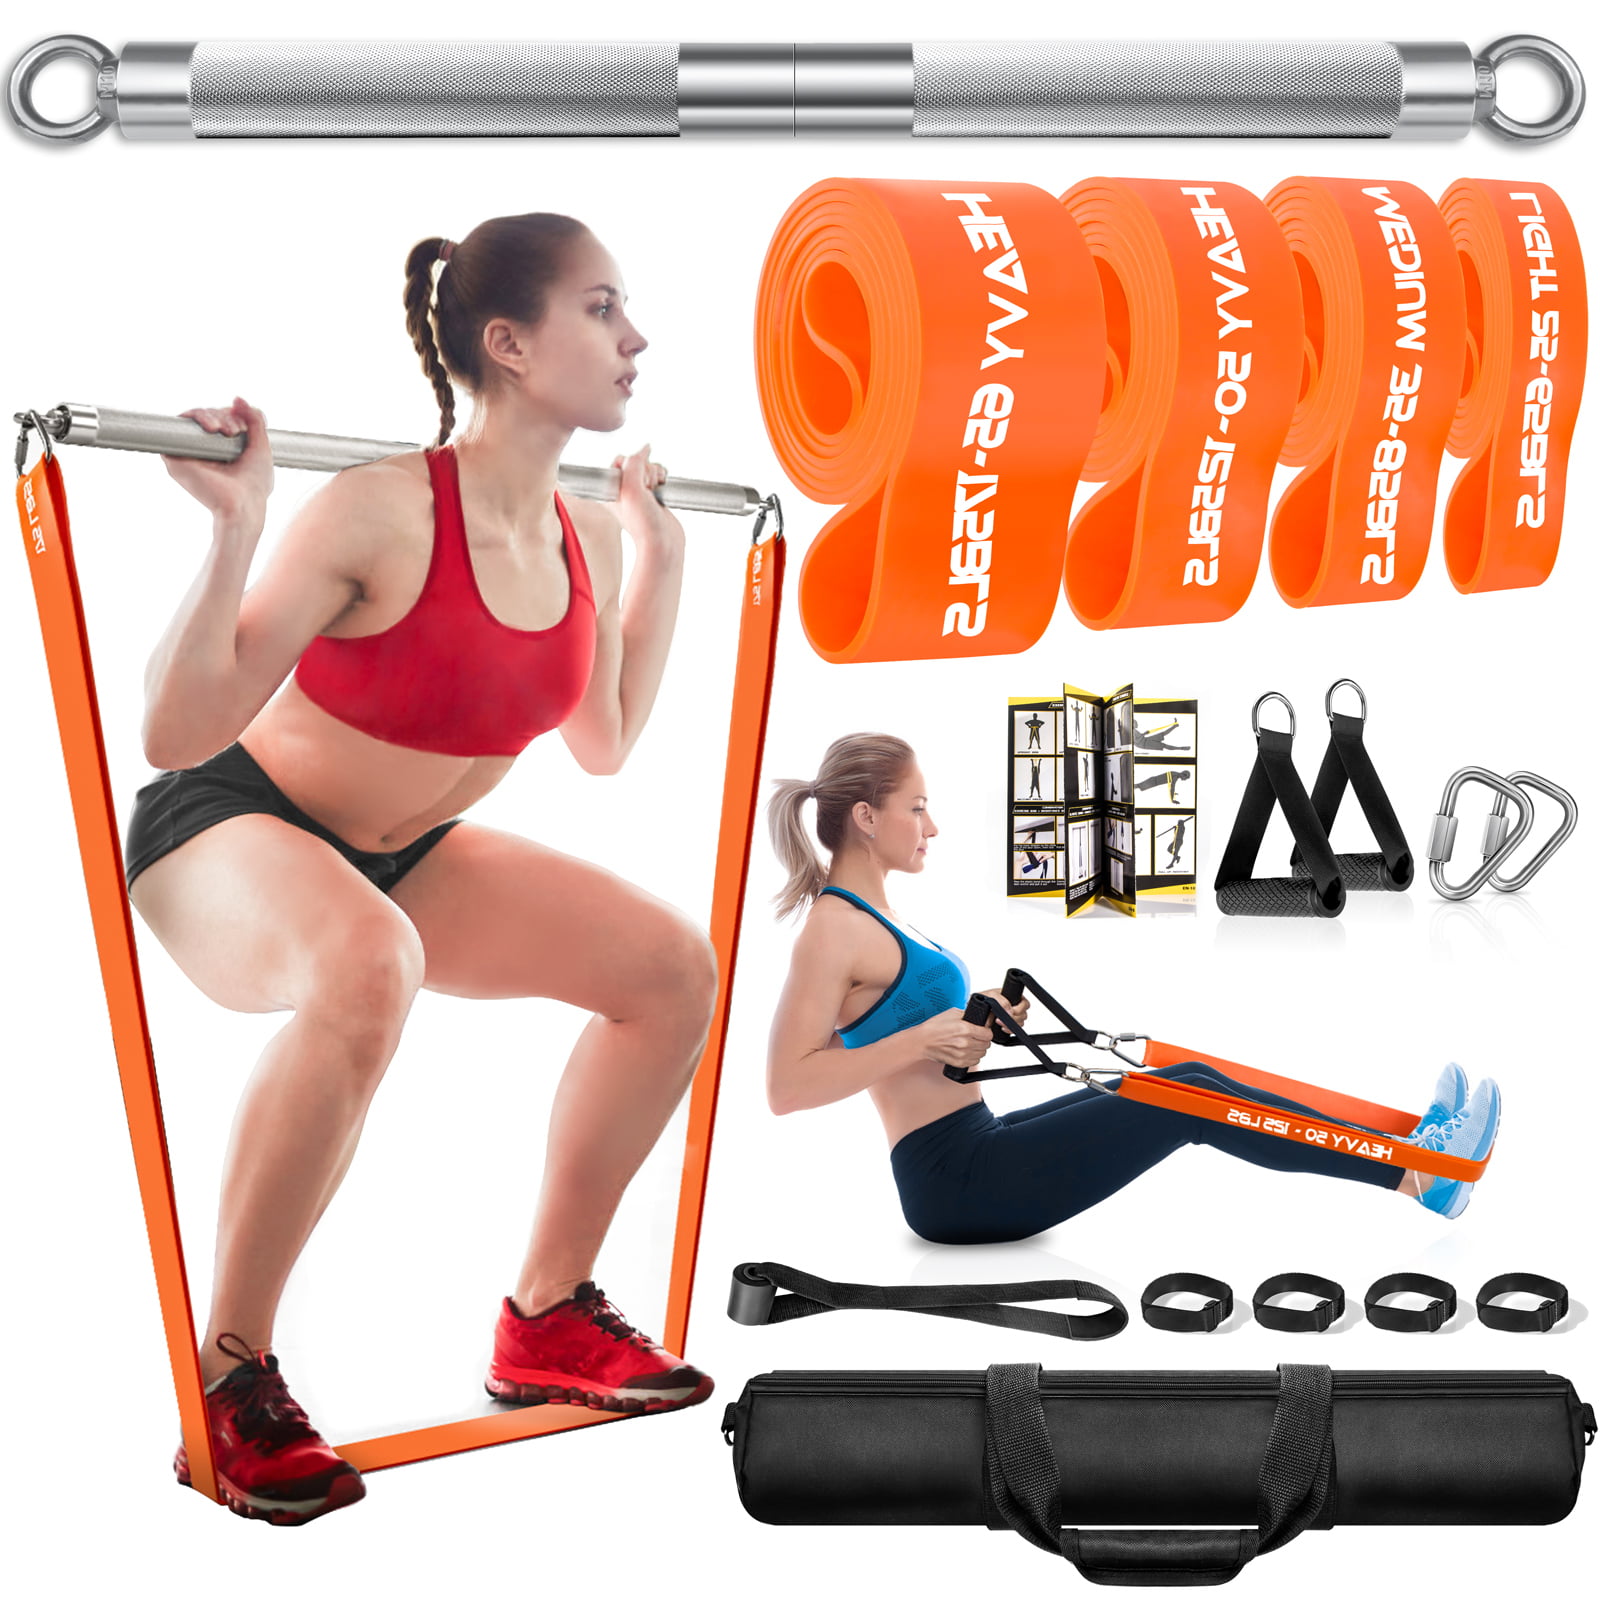  Portable Pilates Bar Kit with Resistance Bands (20